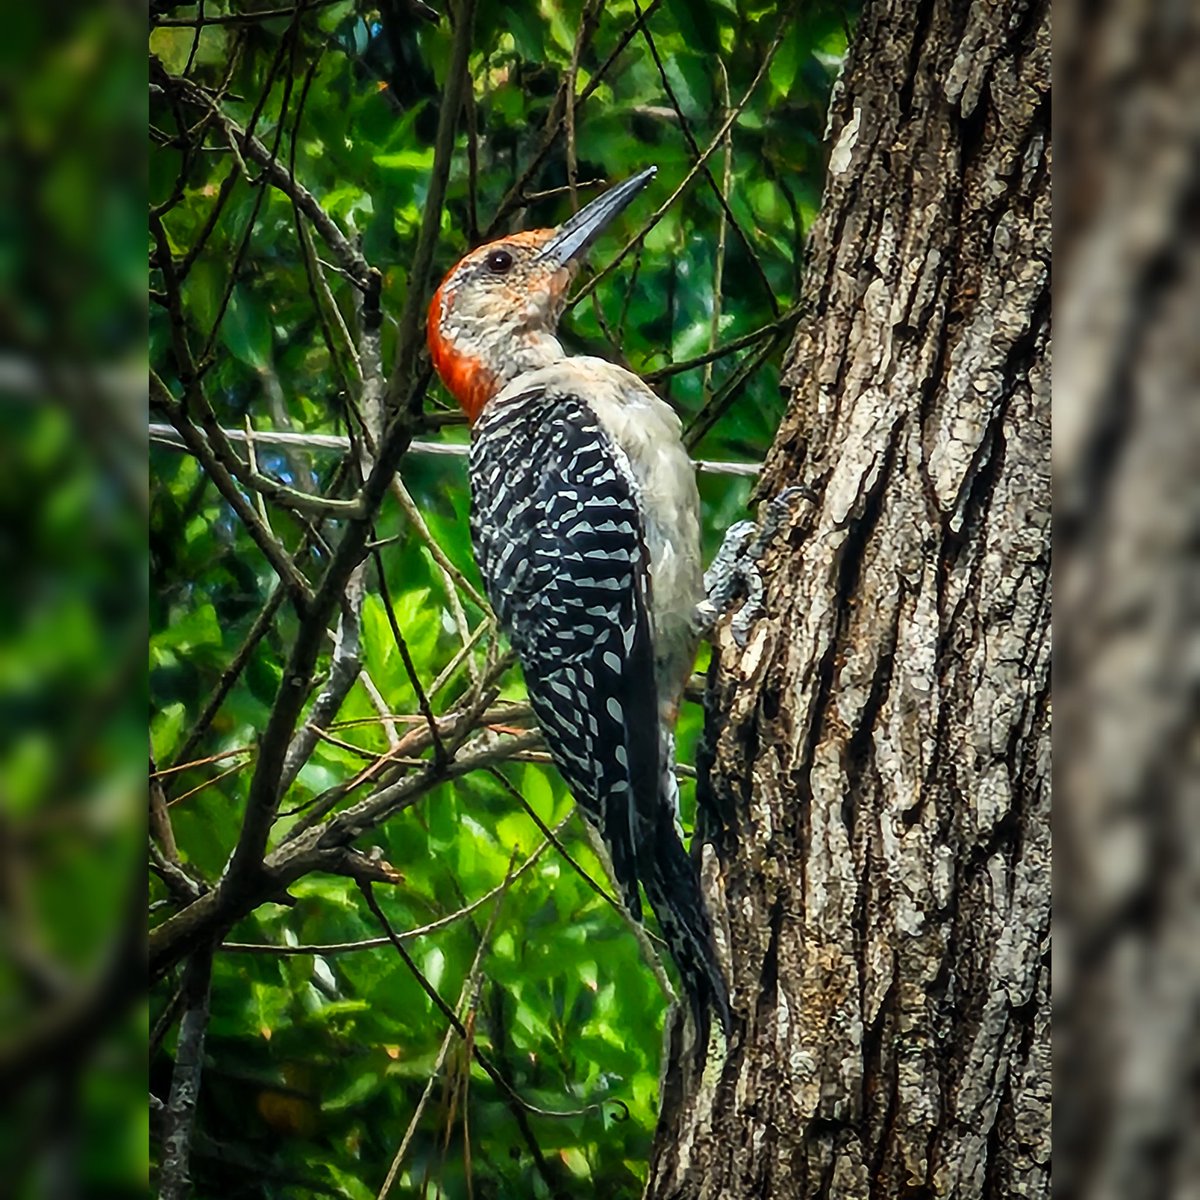 Woodpecker Surverying His Surroundings and Wondering When The Heck I'm Going to Put The Peanuts Out.
#woodpeckersoftwitter #woodpeckerphotography #woodpecker #woodpeckers #birds #bird #birding #nature #naturephotography